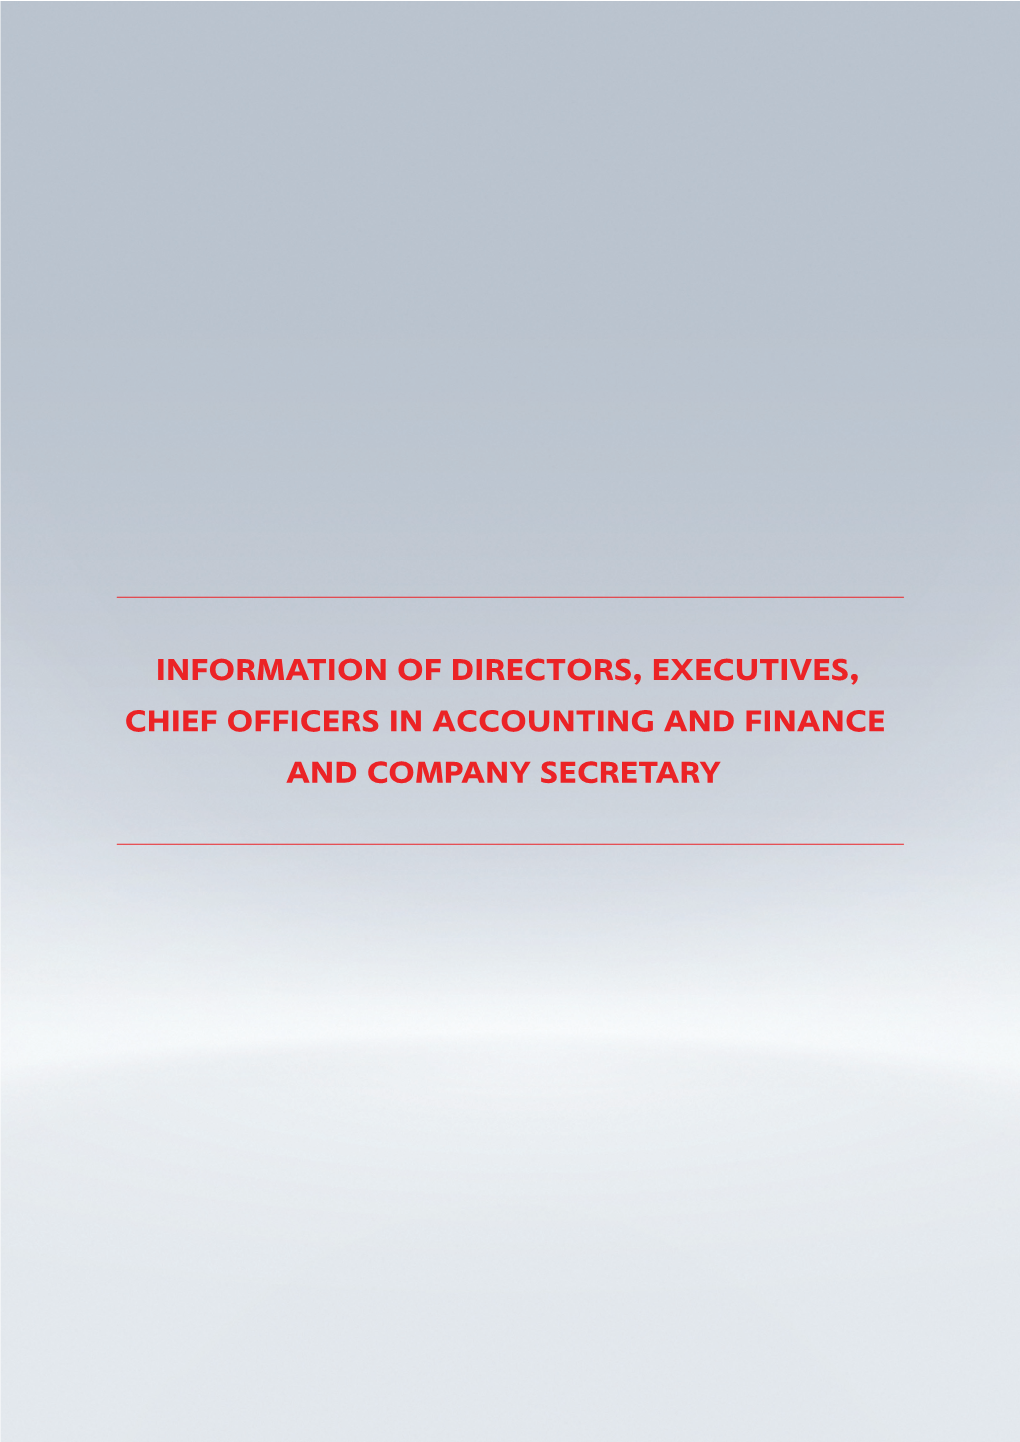 Information of Directors, Executives, Chief Officers in Accounting and Finance and Company Secretary